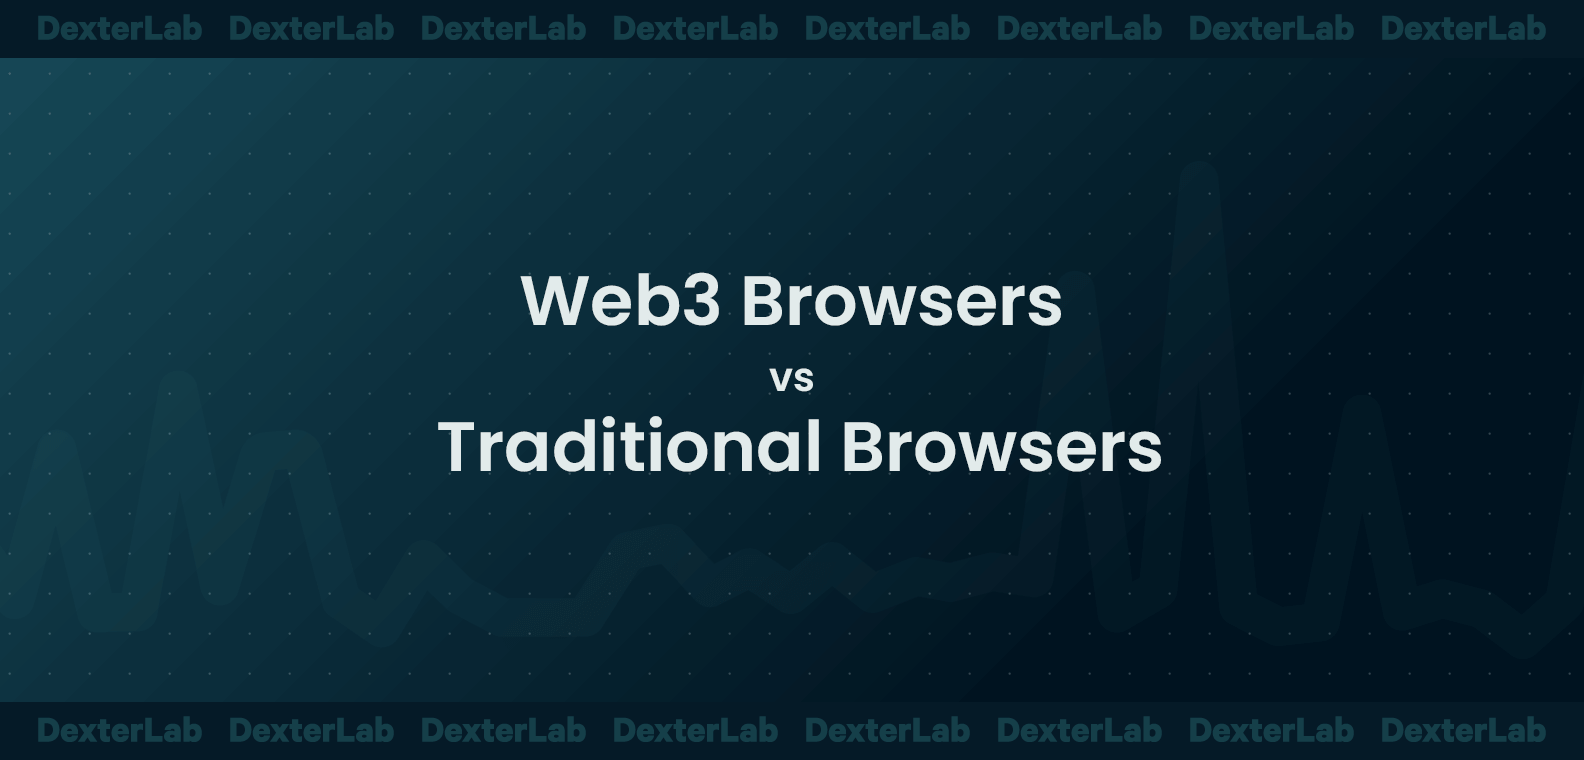 Web3 Browsers vs Traditional Browsers